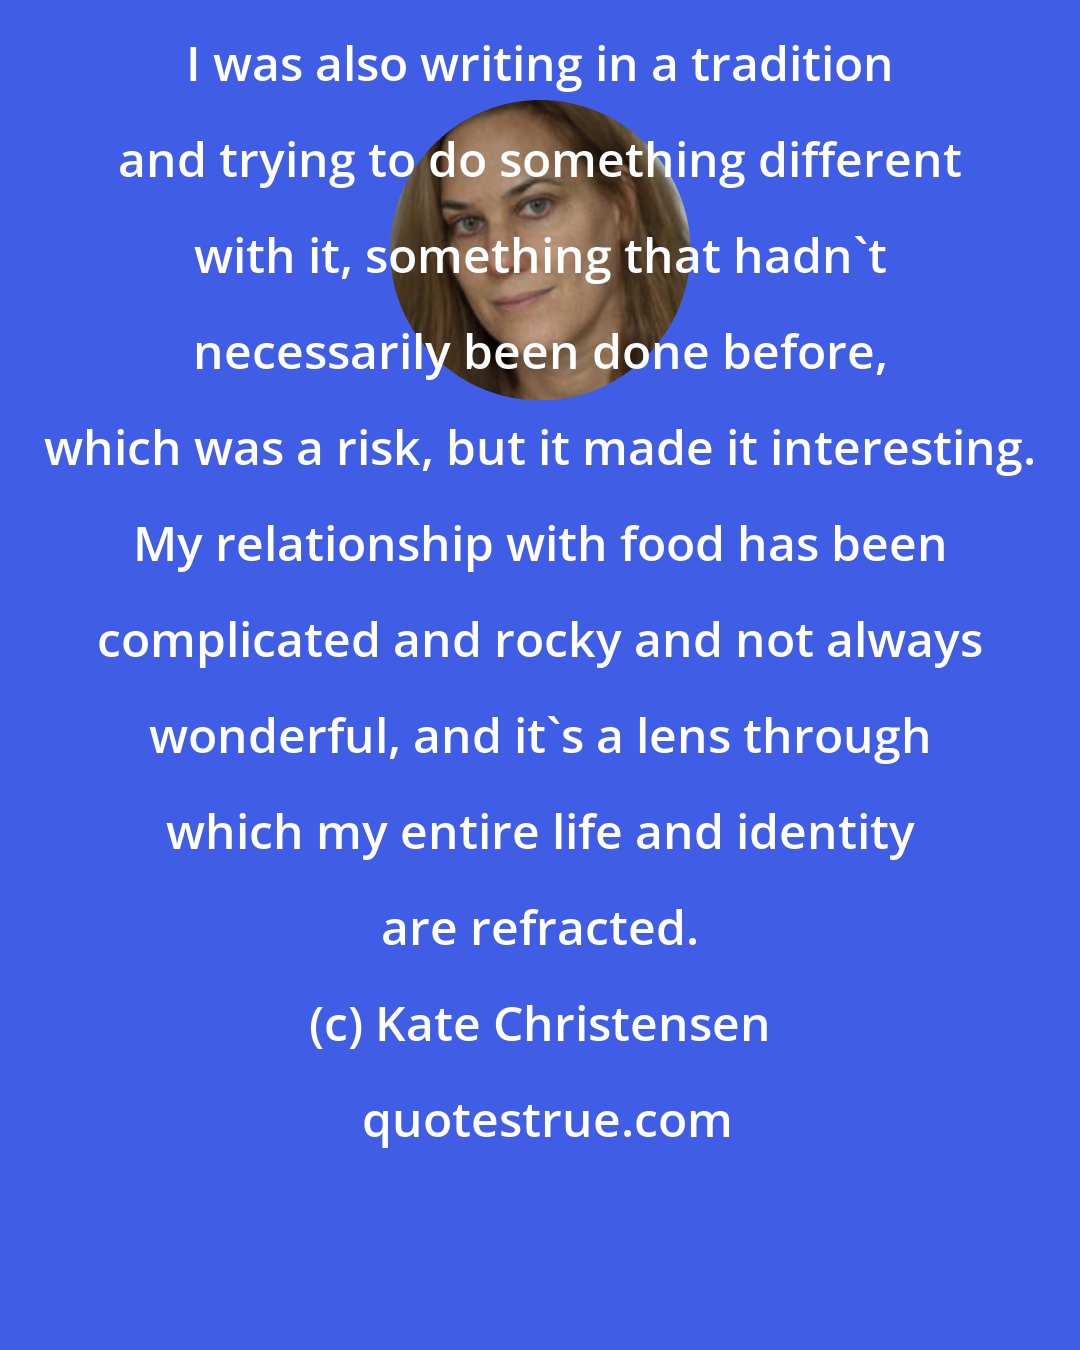 Kate Christensen: I was also writing in a tradition and trying to do something different with it, something that hadn't necessarily been done before, which was a risk, but it made it interesting. My relationship with food has been complicated and rocky and not always wonderful, and it's a lens through which my entire life and identity are refracted.